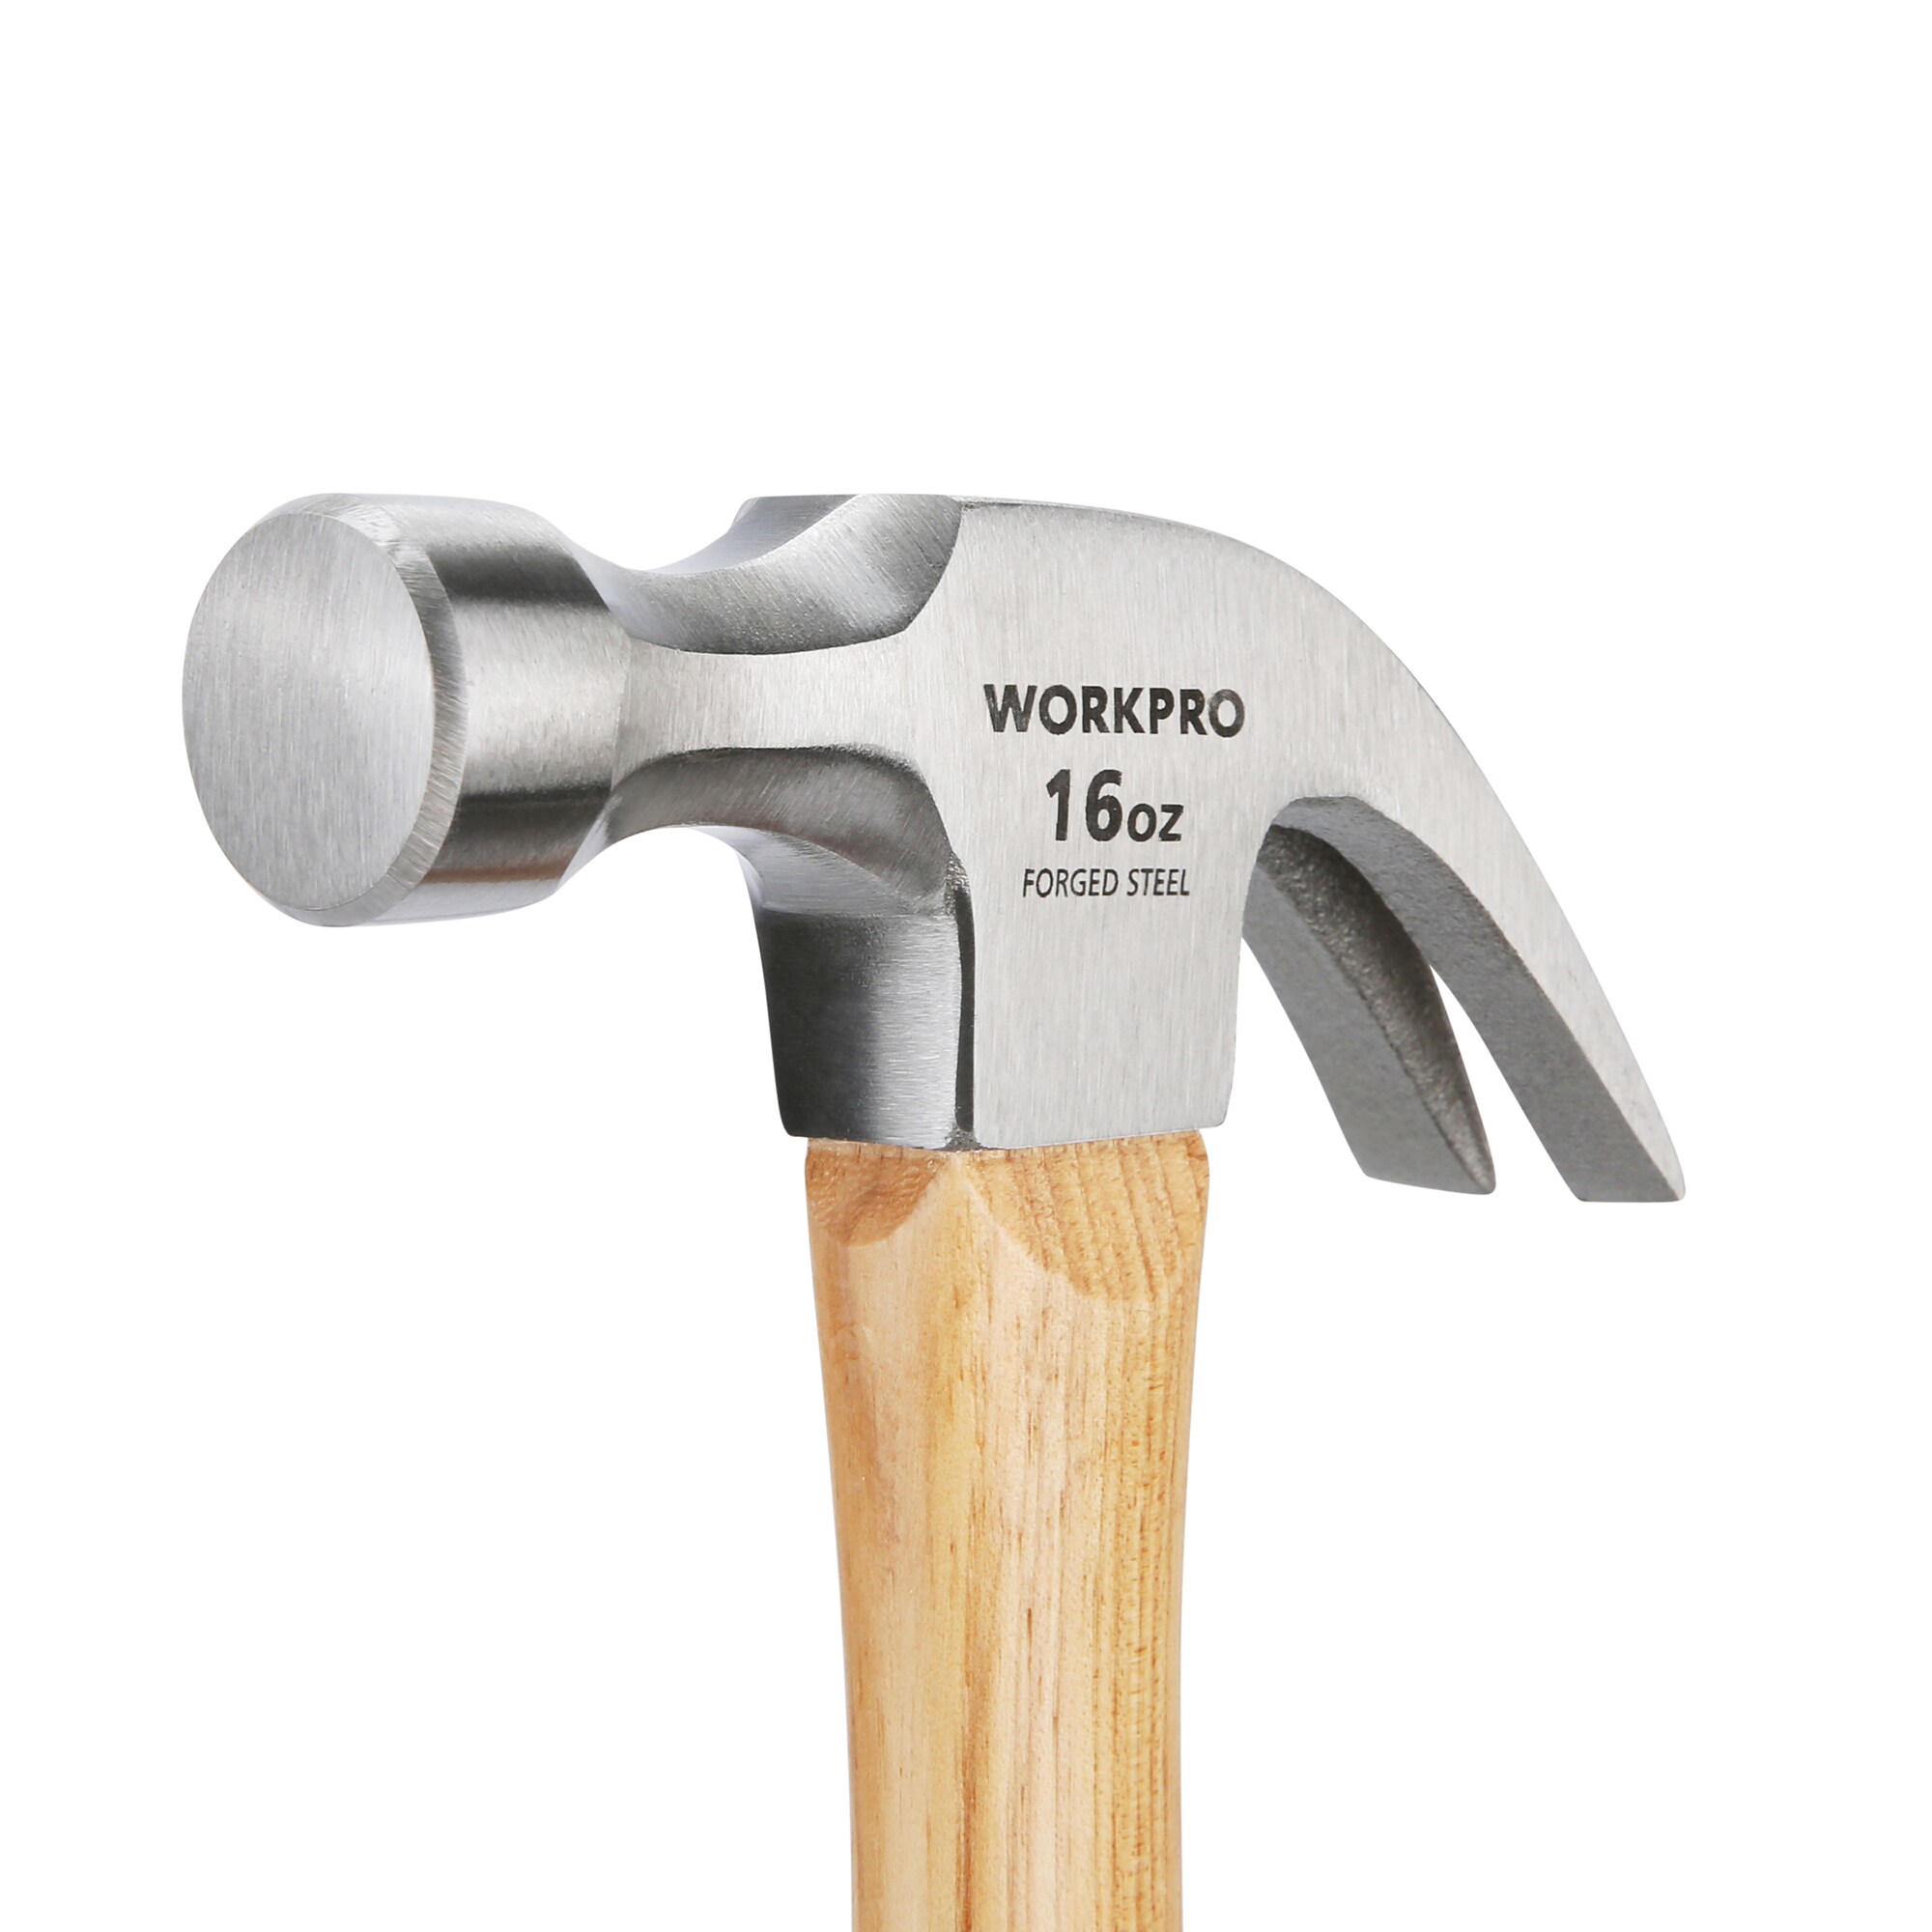 WORKPRO 16-oz Smooth Face Steel Head Wood Claw Hammer in the 